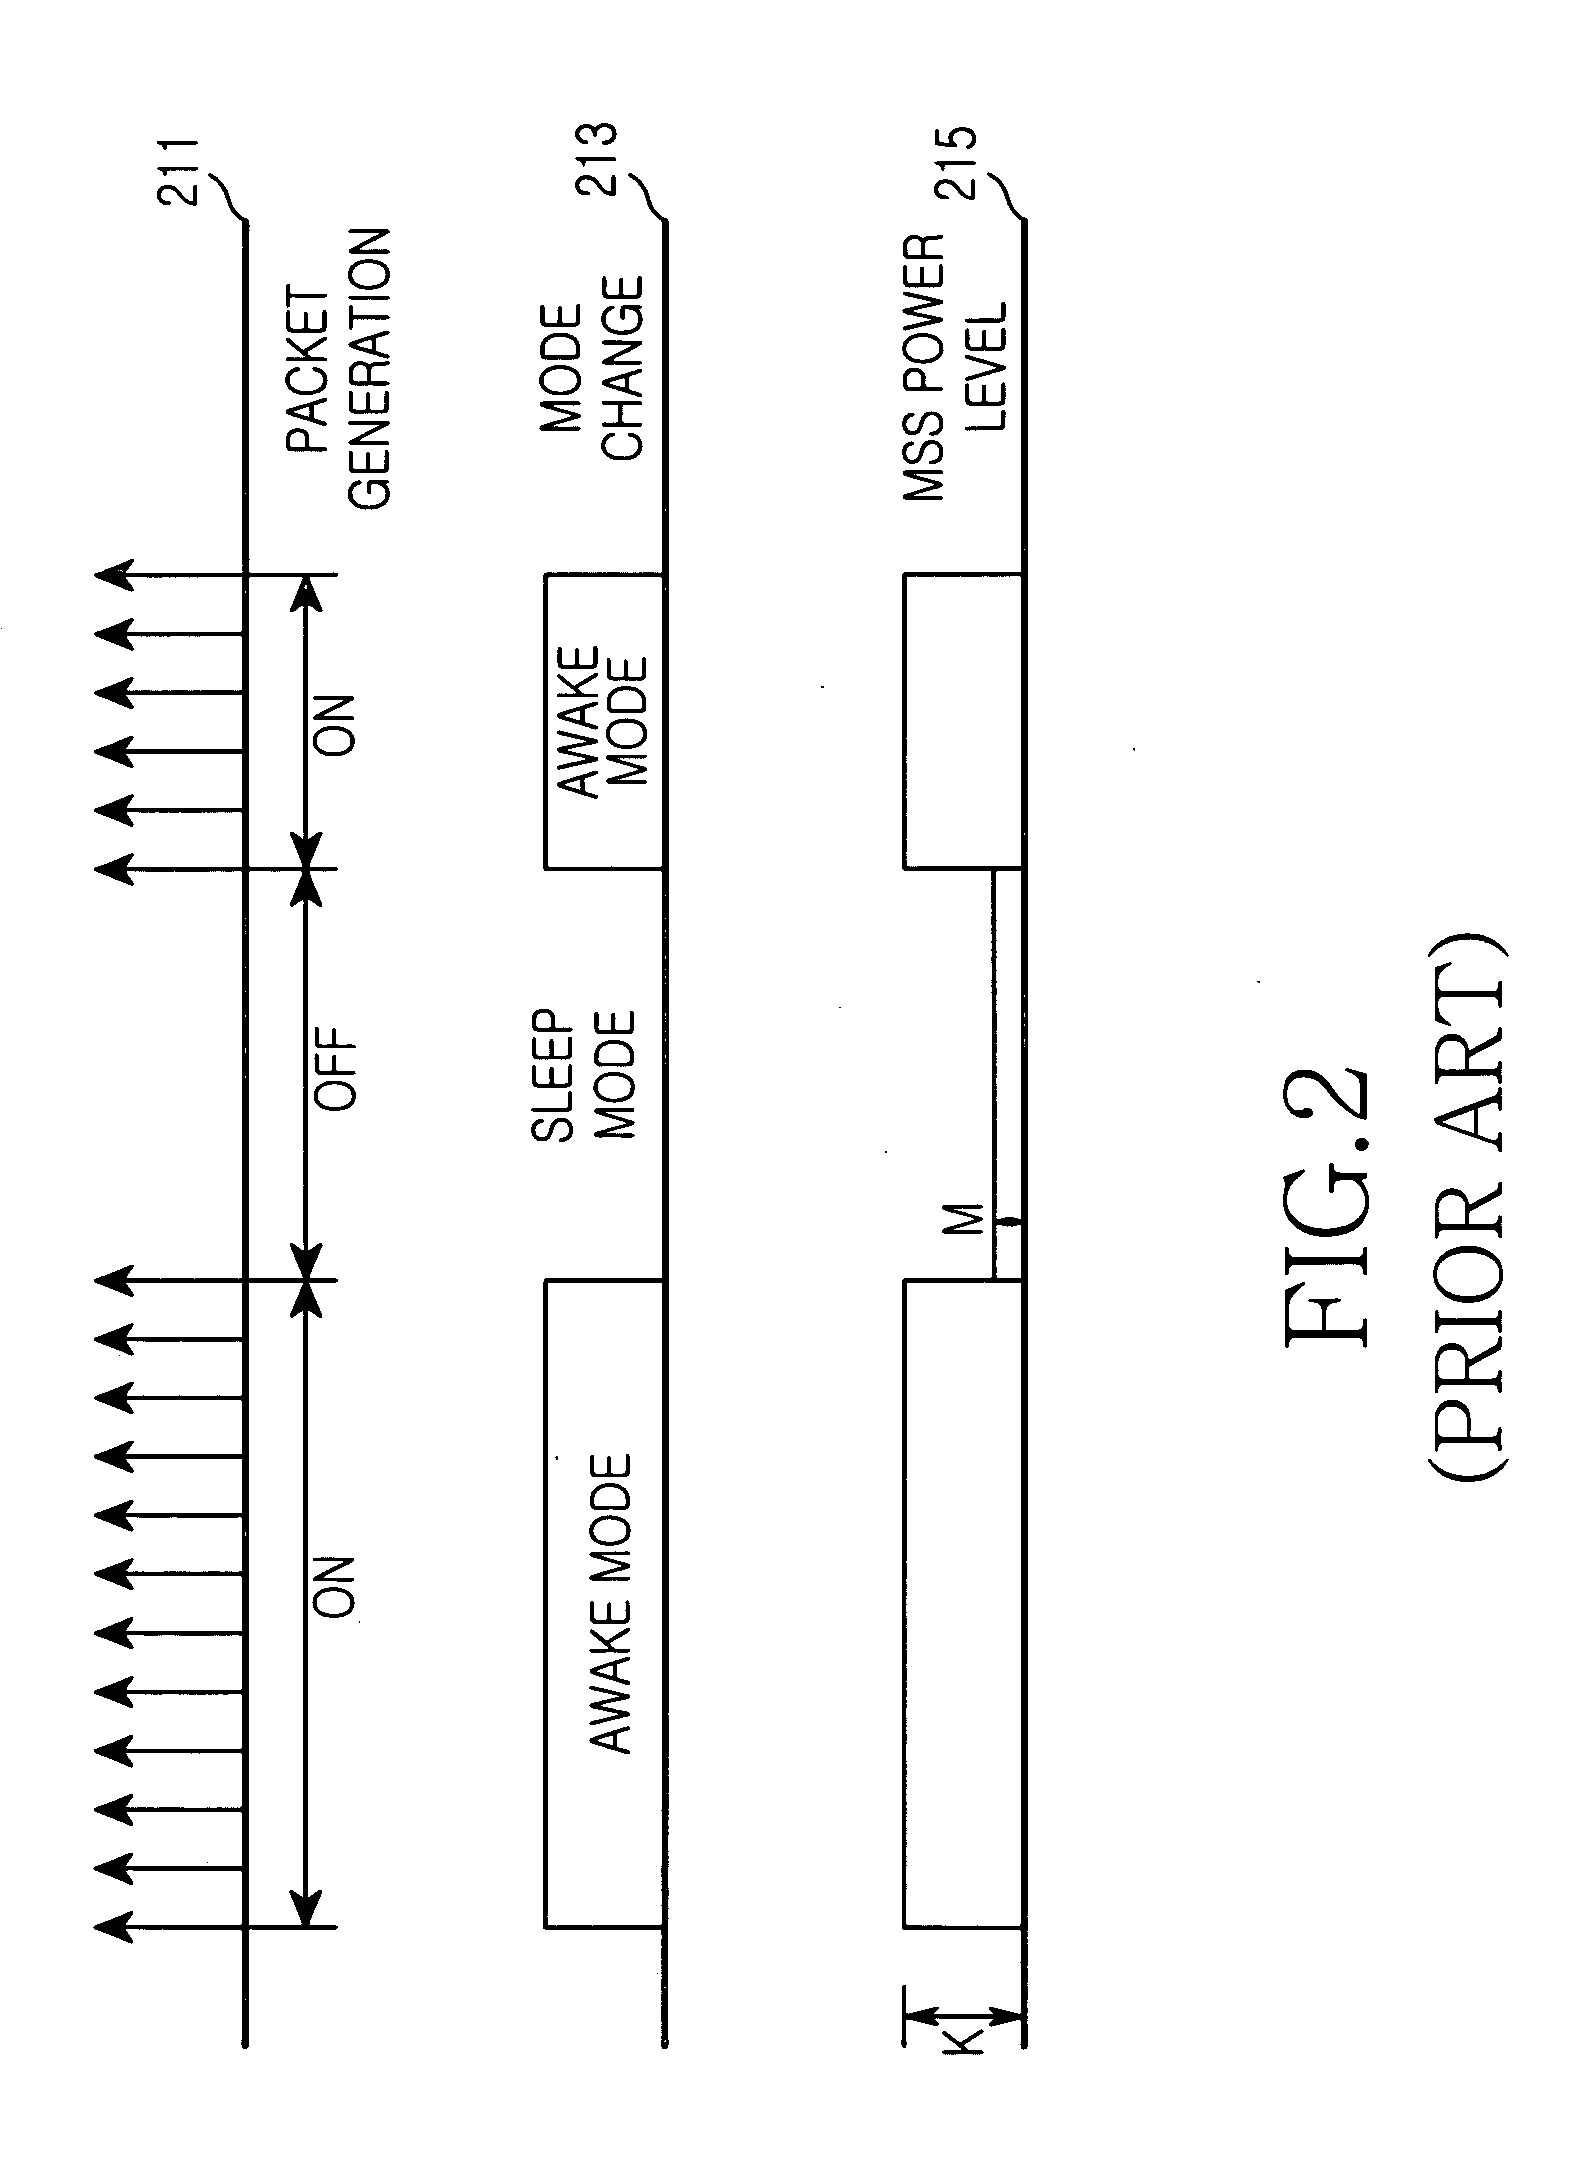 Method for a fast state transition from a sleep mode to an awake mode in a broadband wireless access communication system